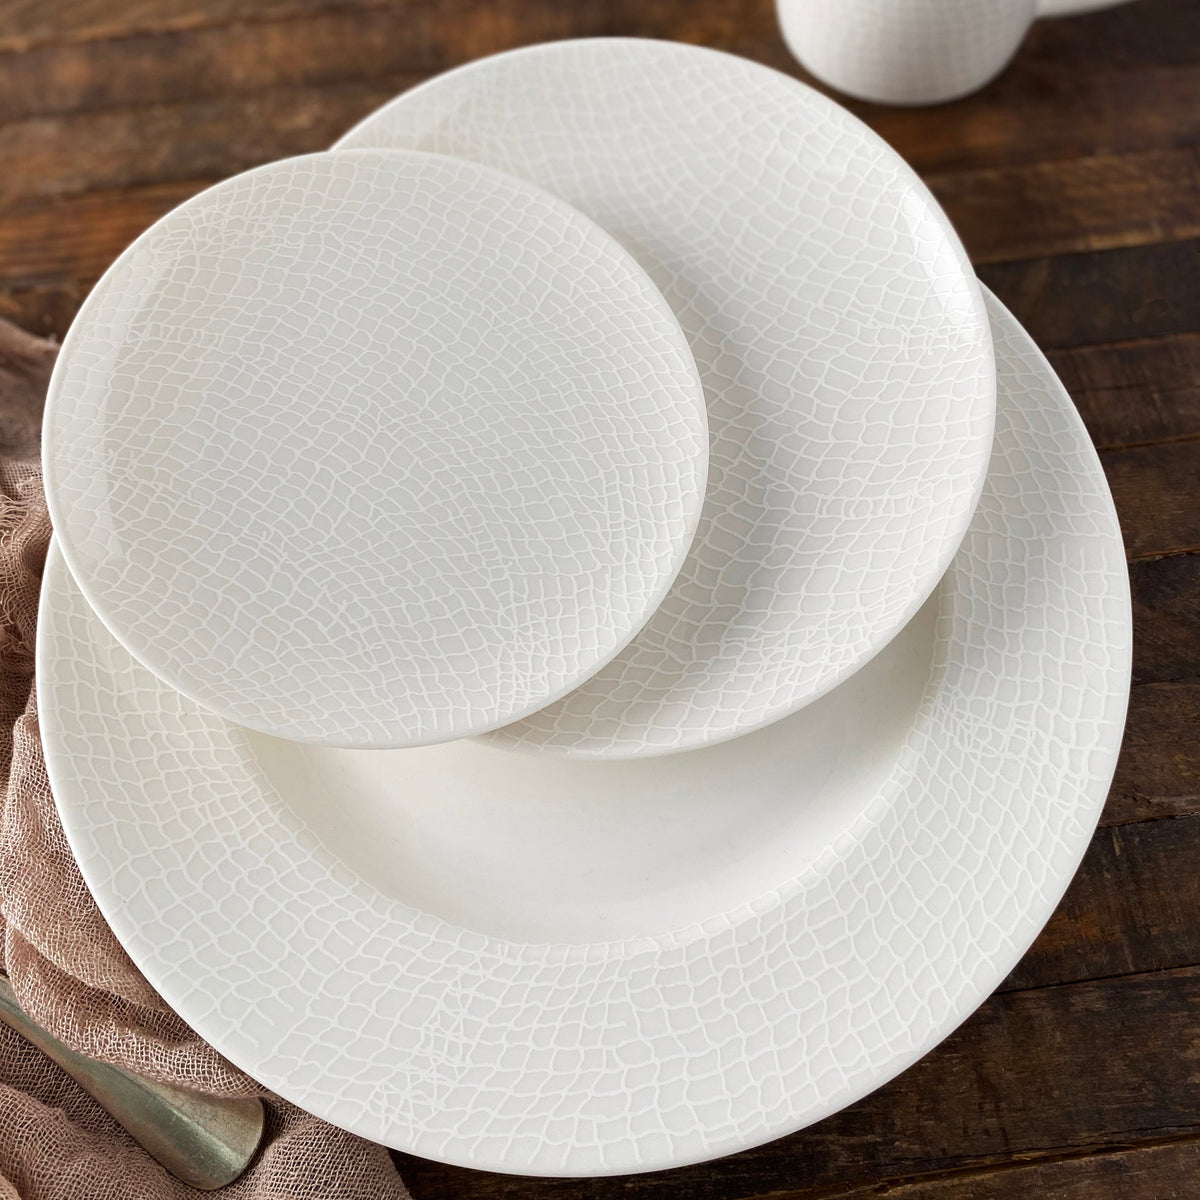 A set of three Catch Small Plates by Caskata Artisanal Home, with a textured pattern, arranged on a wooden table alongside a light brown cloth, evokes the intricate design of a fisherman&#39;s net.